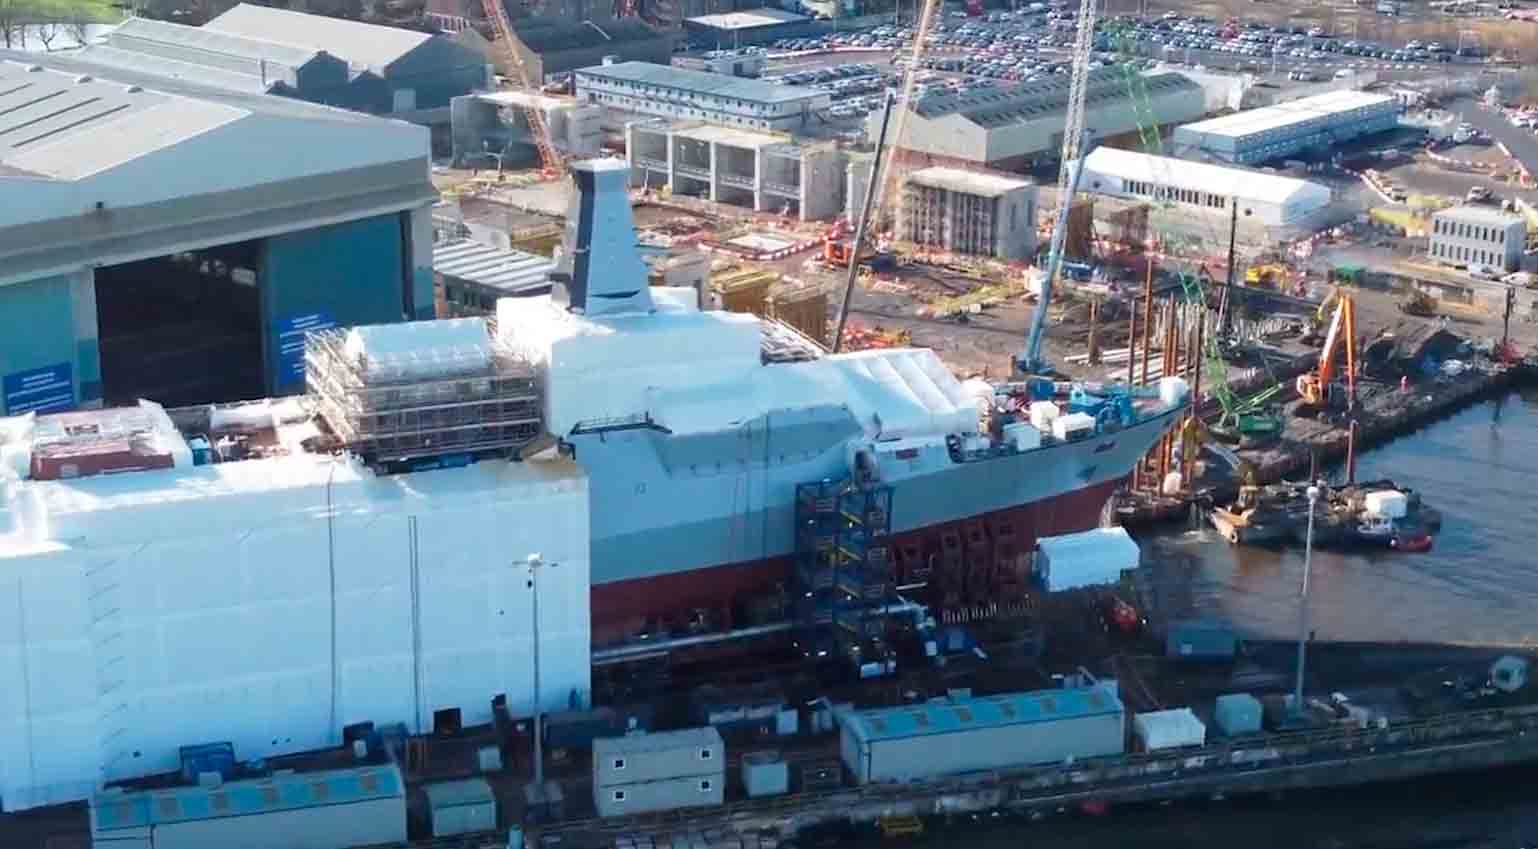 Video: Drone shows construction of the new Type 26 frigate in Glasgow. Video and photos: Reproduction Twitter @geoallison